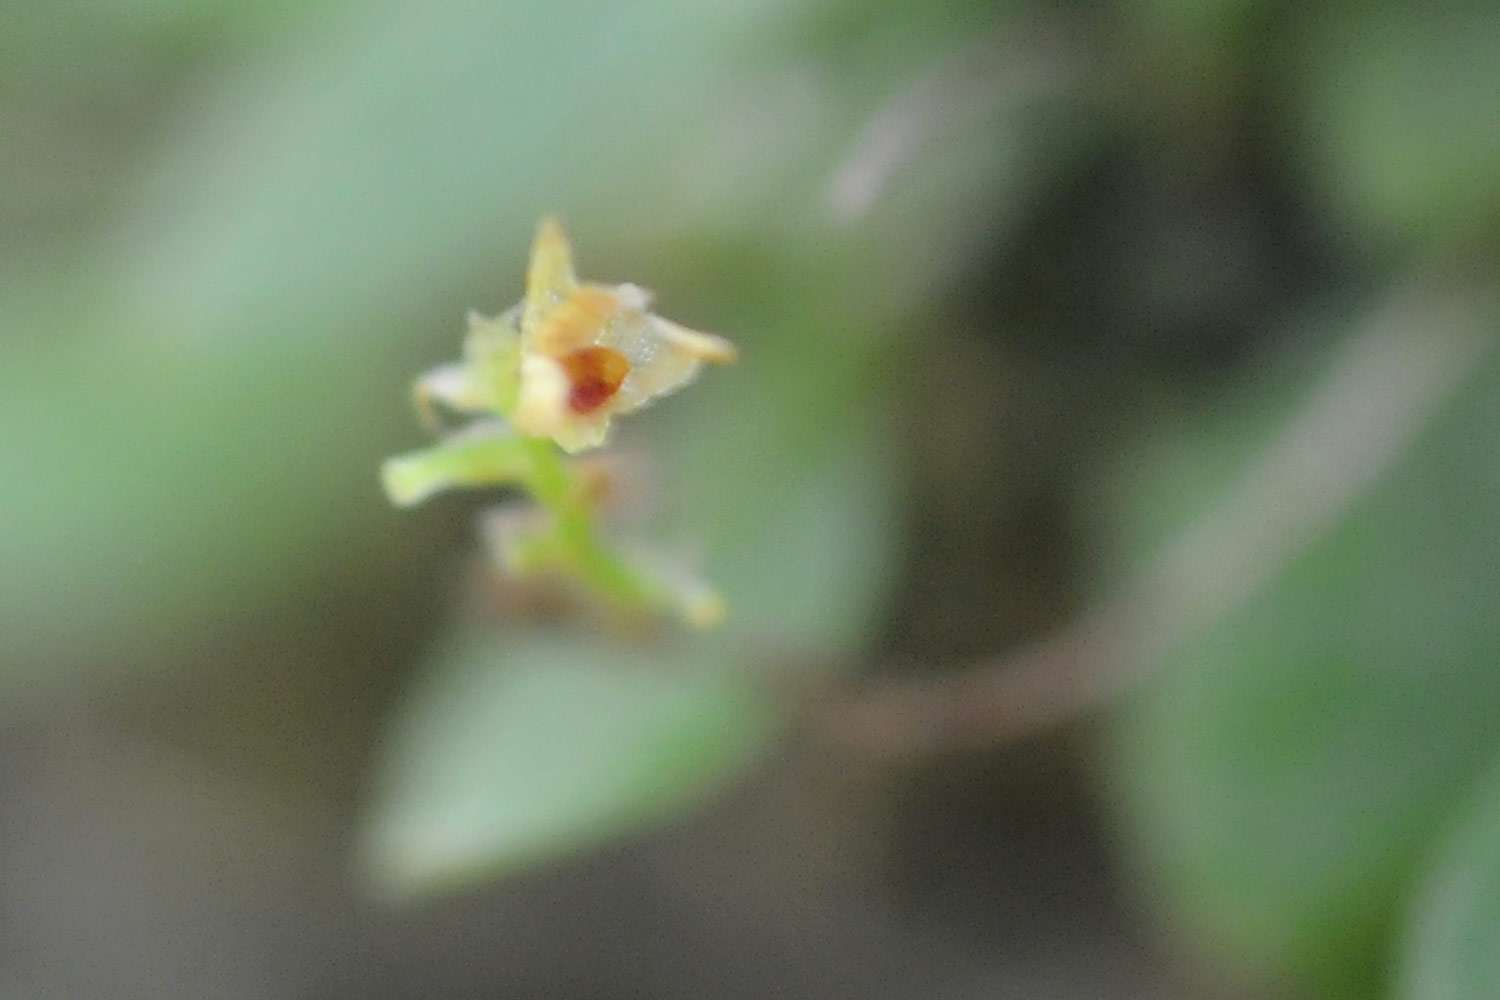 Smallest orchid in the world, platystele jungermannioides.